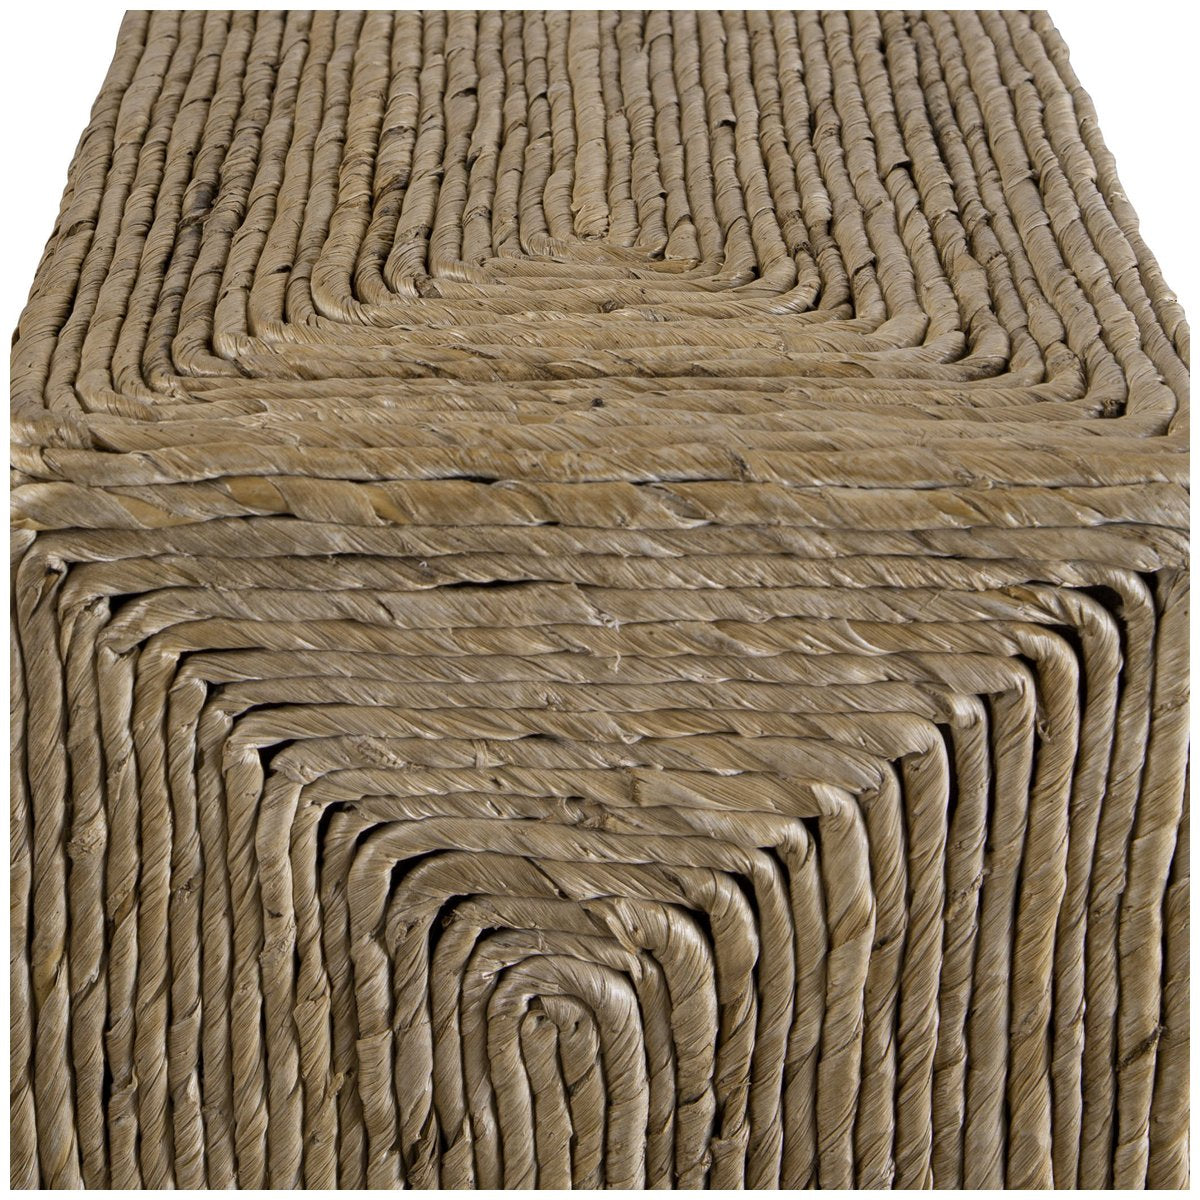 Uttermost Rora Woven Accent Table